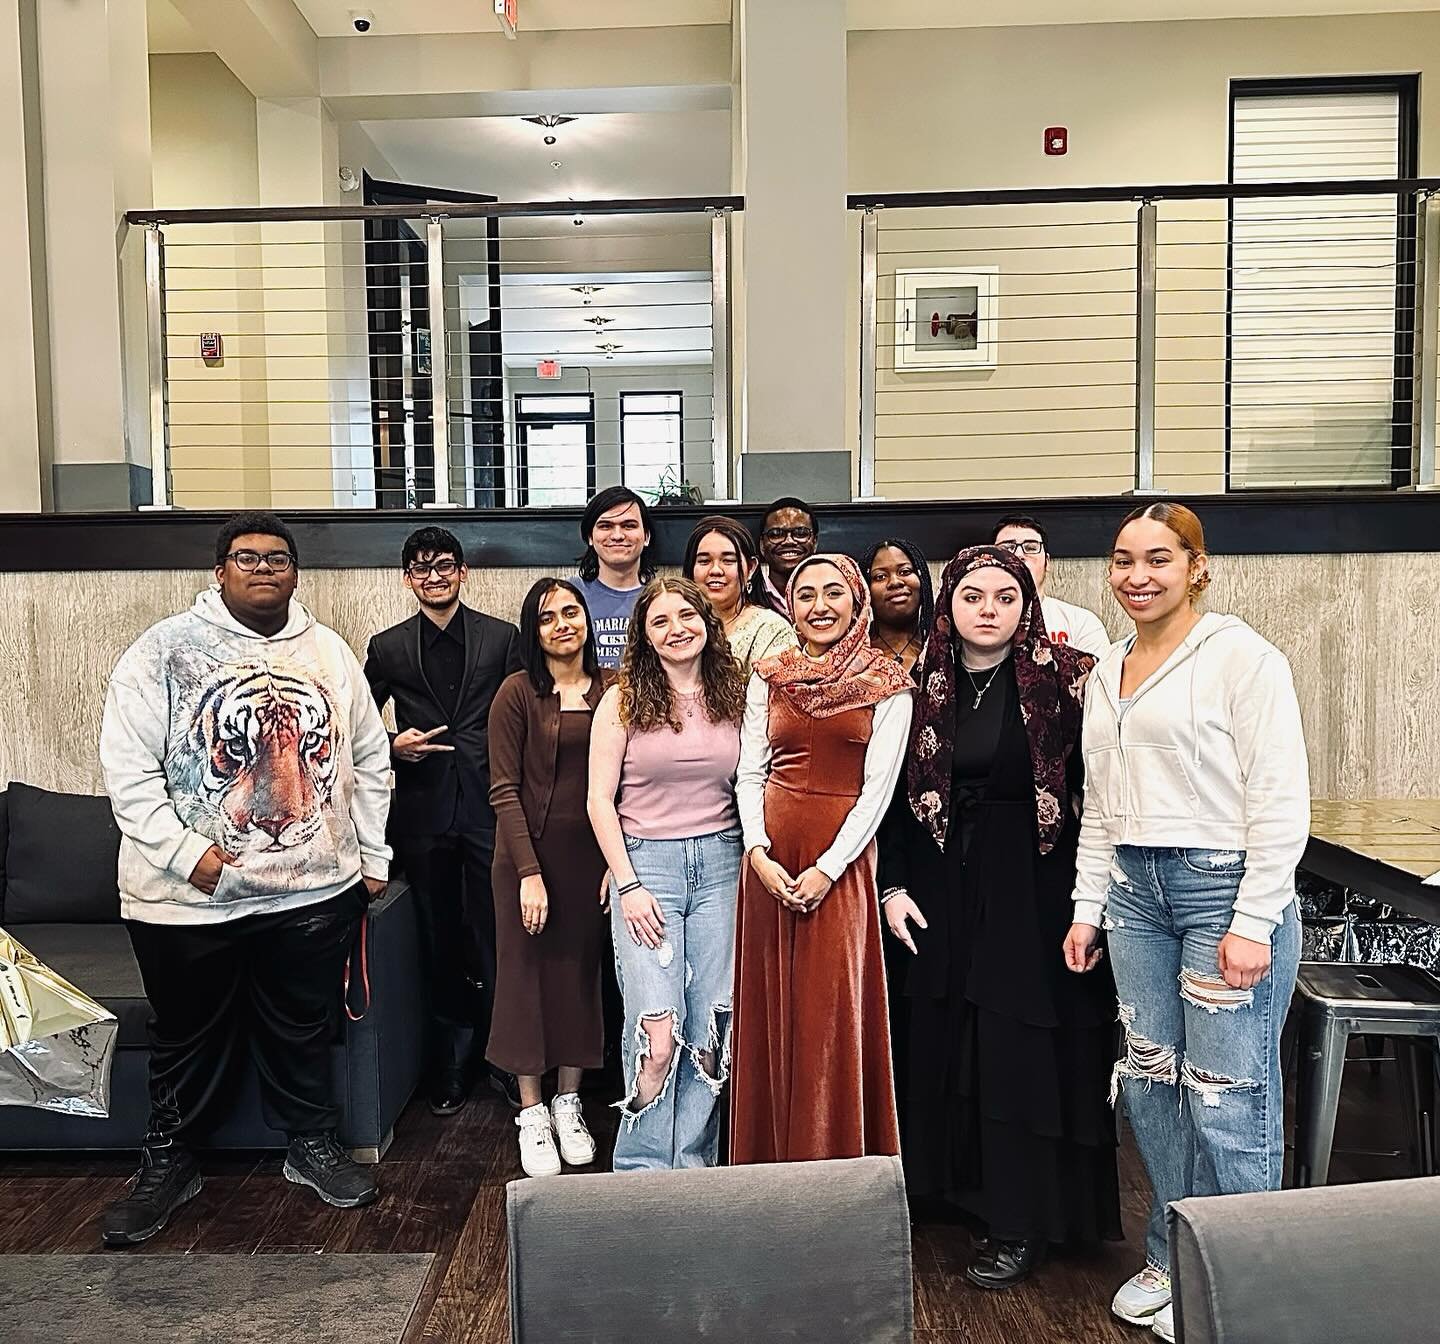 We are so grateful that we had the opportunity to host @ysupoetryclub for their banquet! What an awesome way to end the year. ❤️🖤

Interested in hosting an event with us? Shoot us a DM so that we can collaborate!✨